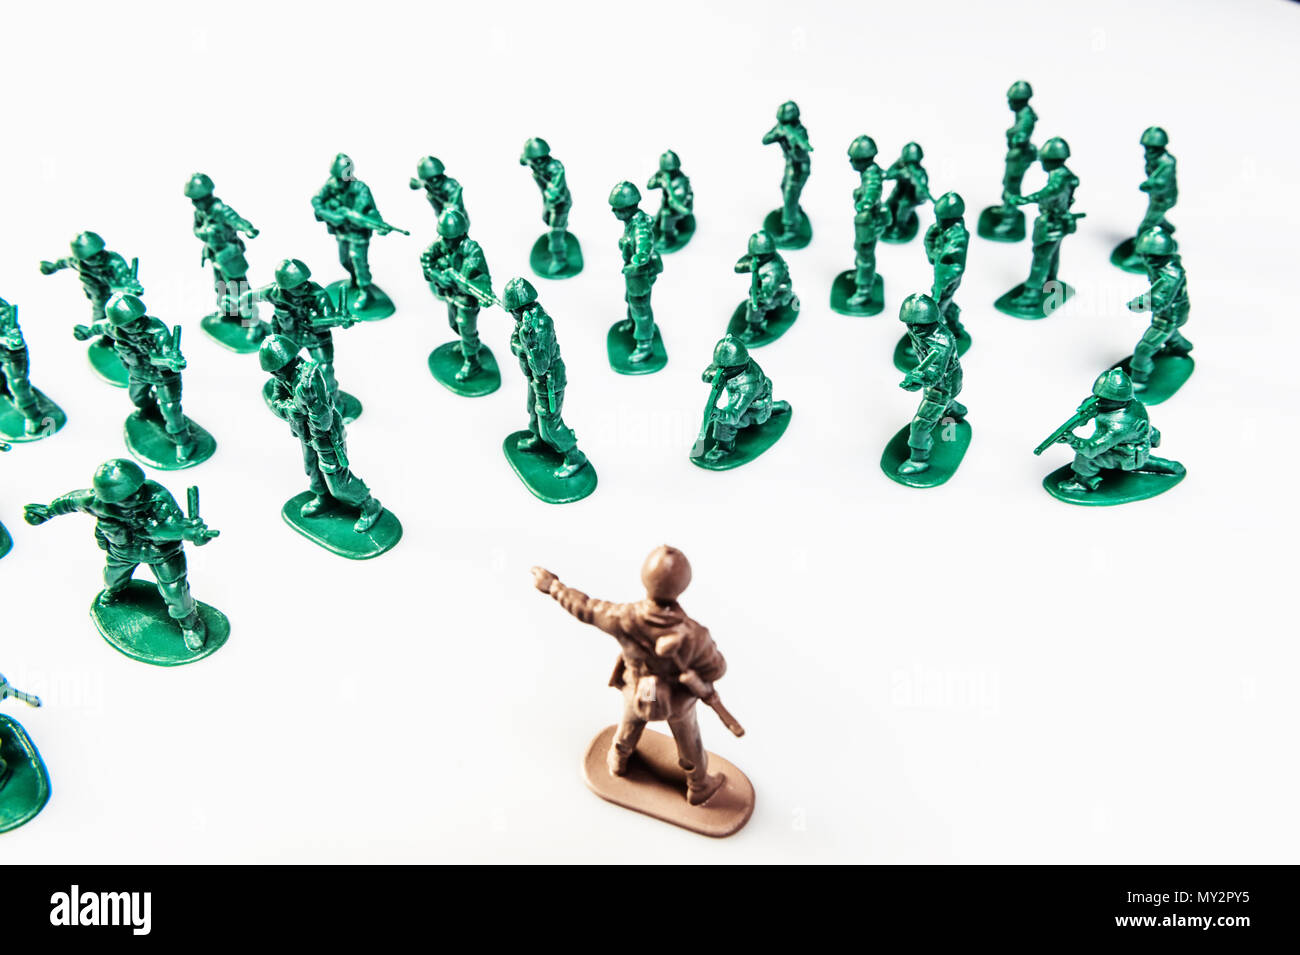 BATTLE OF SOLDIERS ON WHITE BACKGROUND Stock Photo